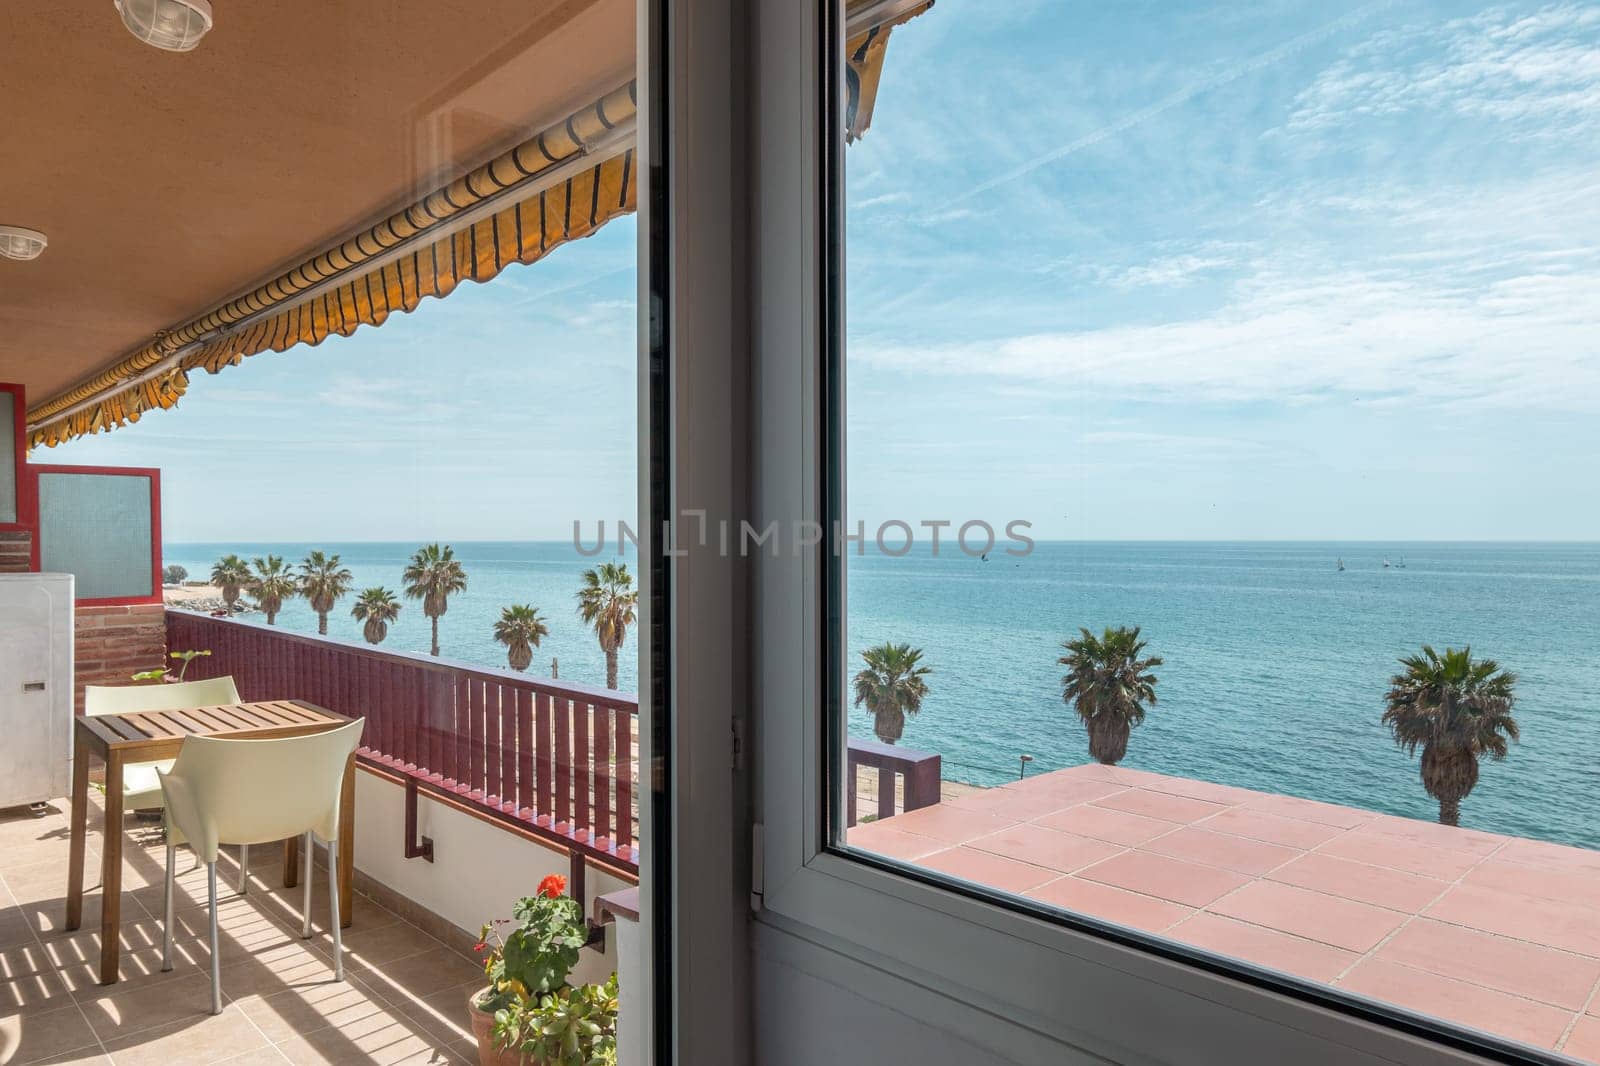 Comfortable terrace with table and seats in apartment on Vilassar de Mar embankment. Tourist flat balcony on sea coast at Catalonia resort